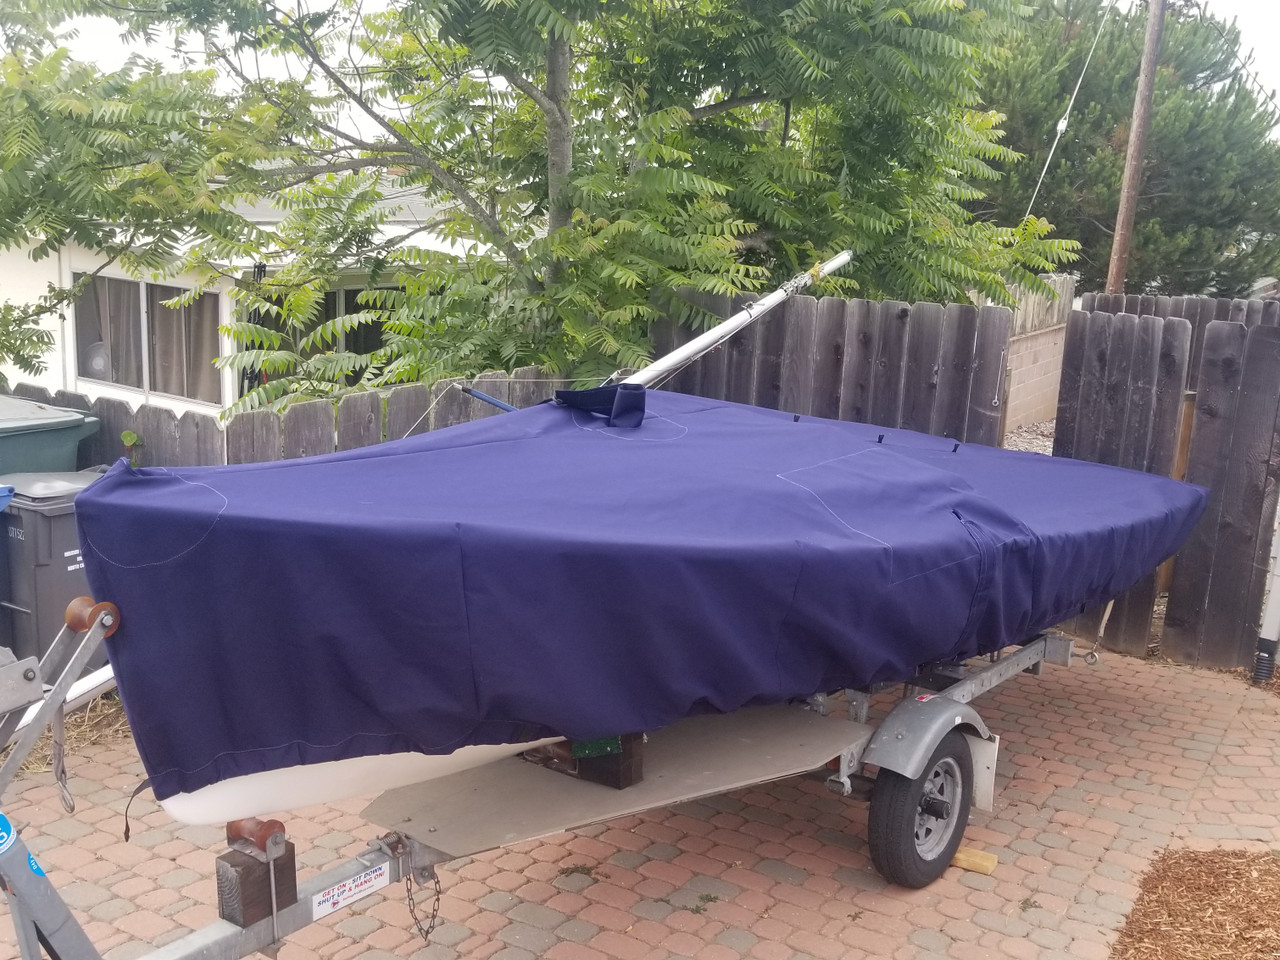 O'Day Daysailer Mast Up Flat - Skirted Mooring Cover by SLO Sail and Canvas. Shown in Sunbrella Captain Navy.